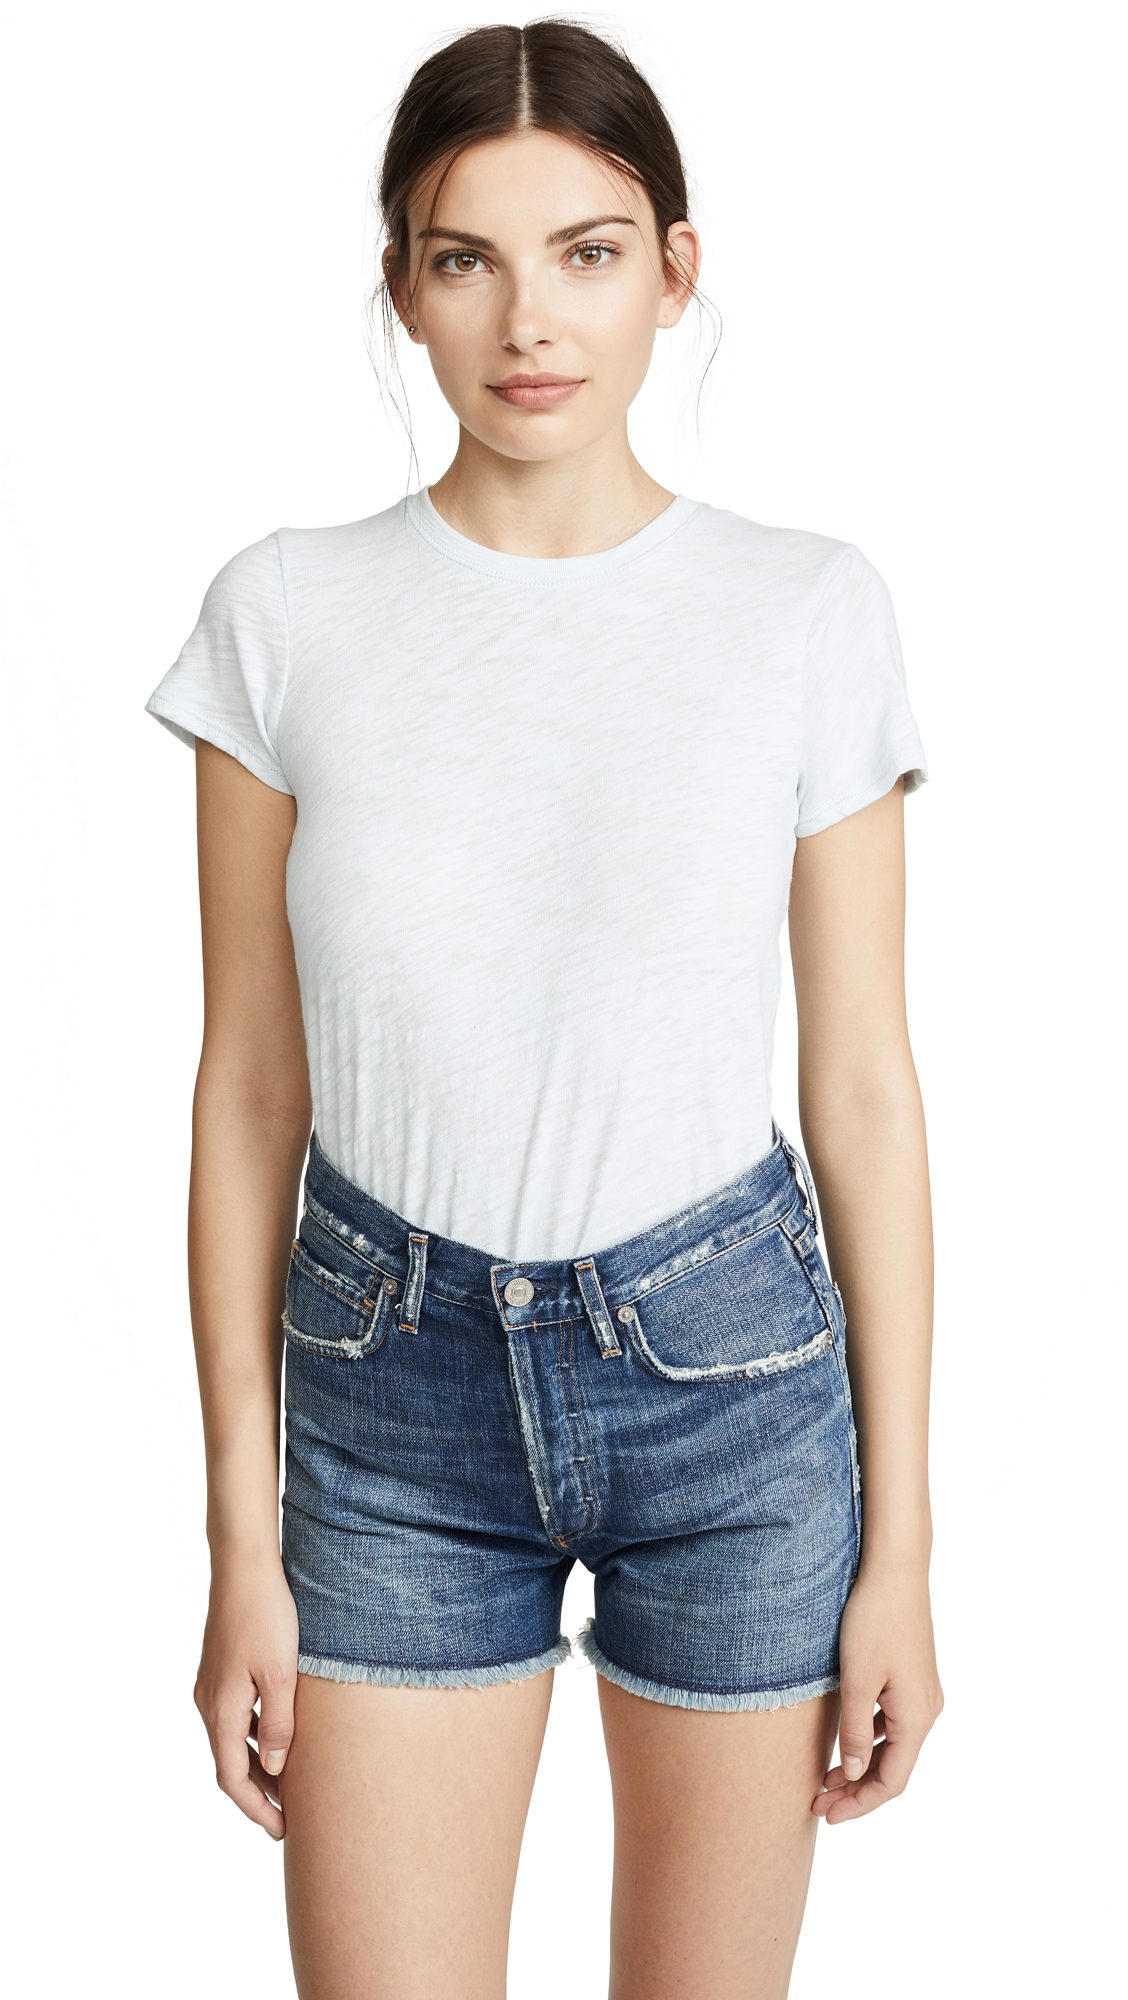 The White T-Shirt I Always Suggest to My A-List Clients | Who What Wear